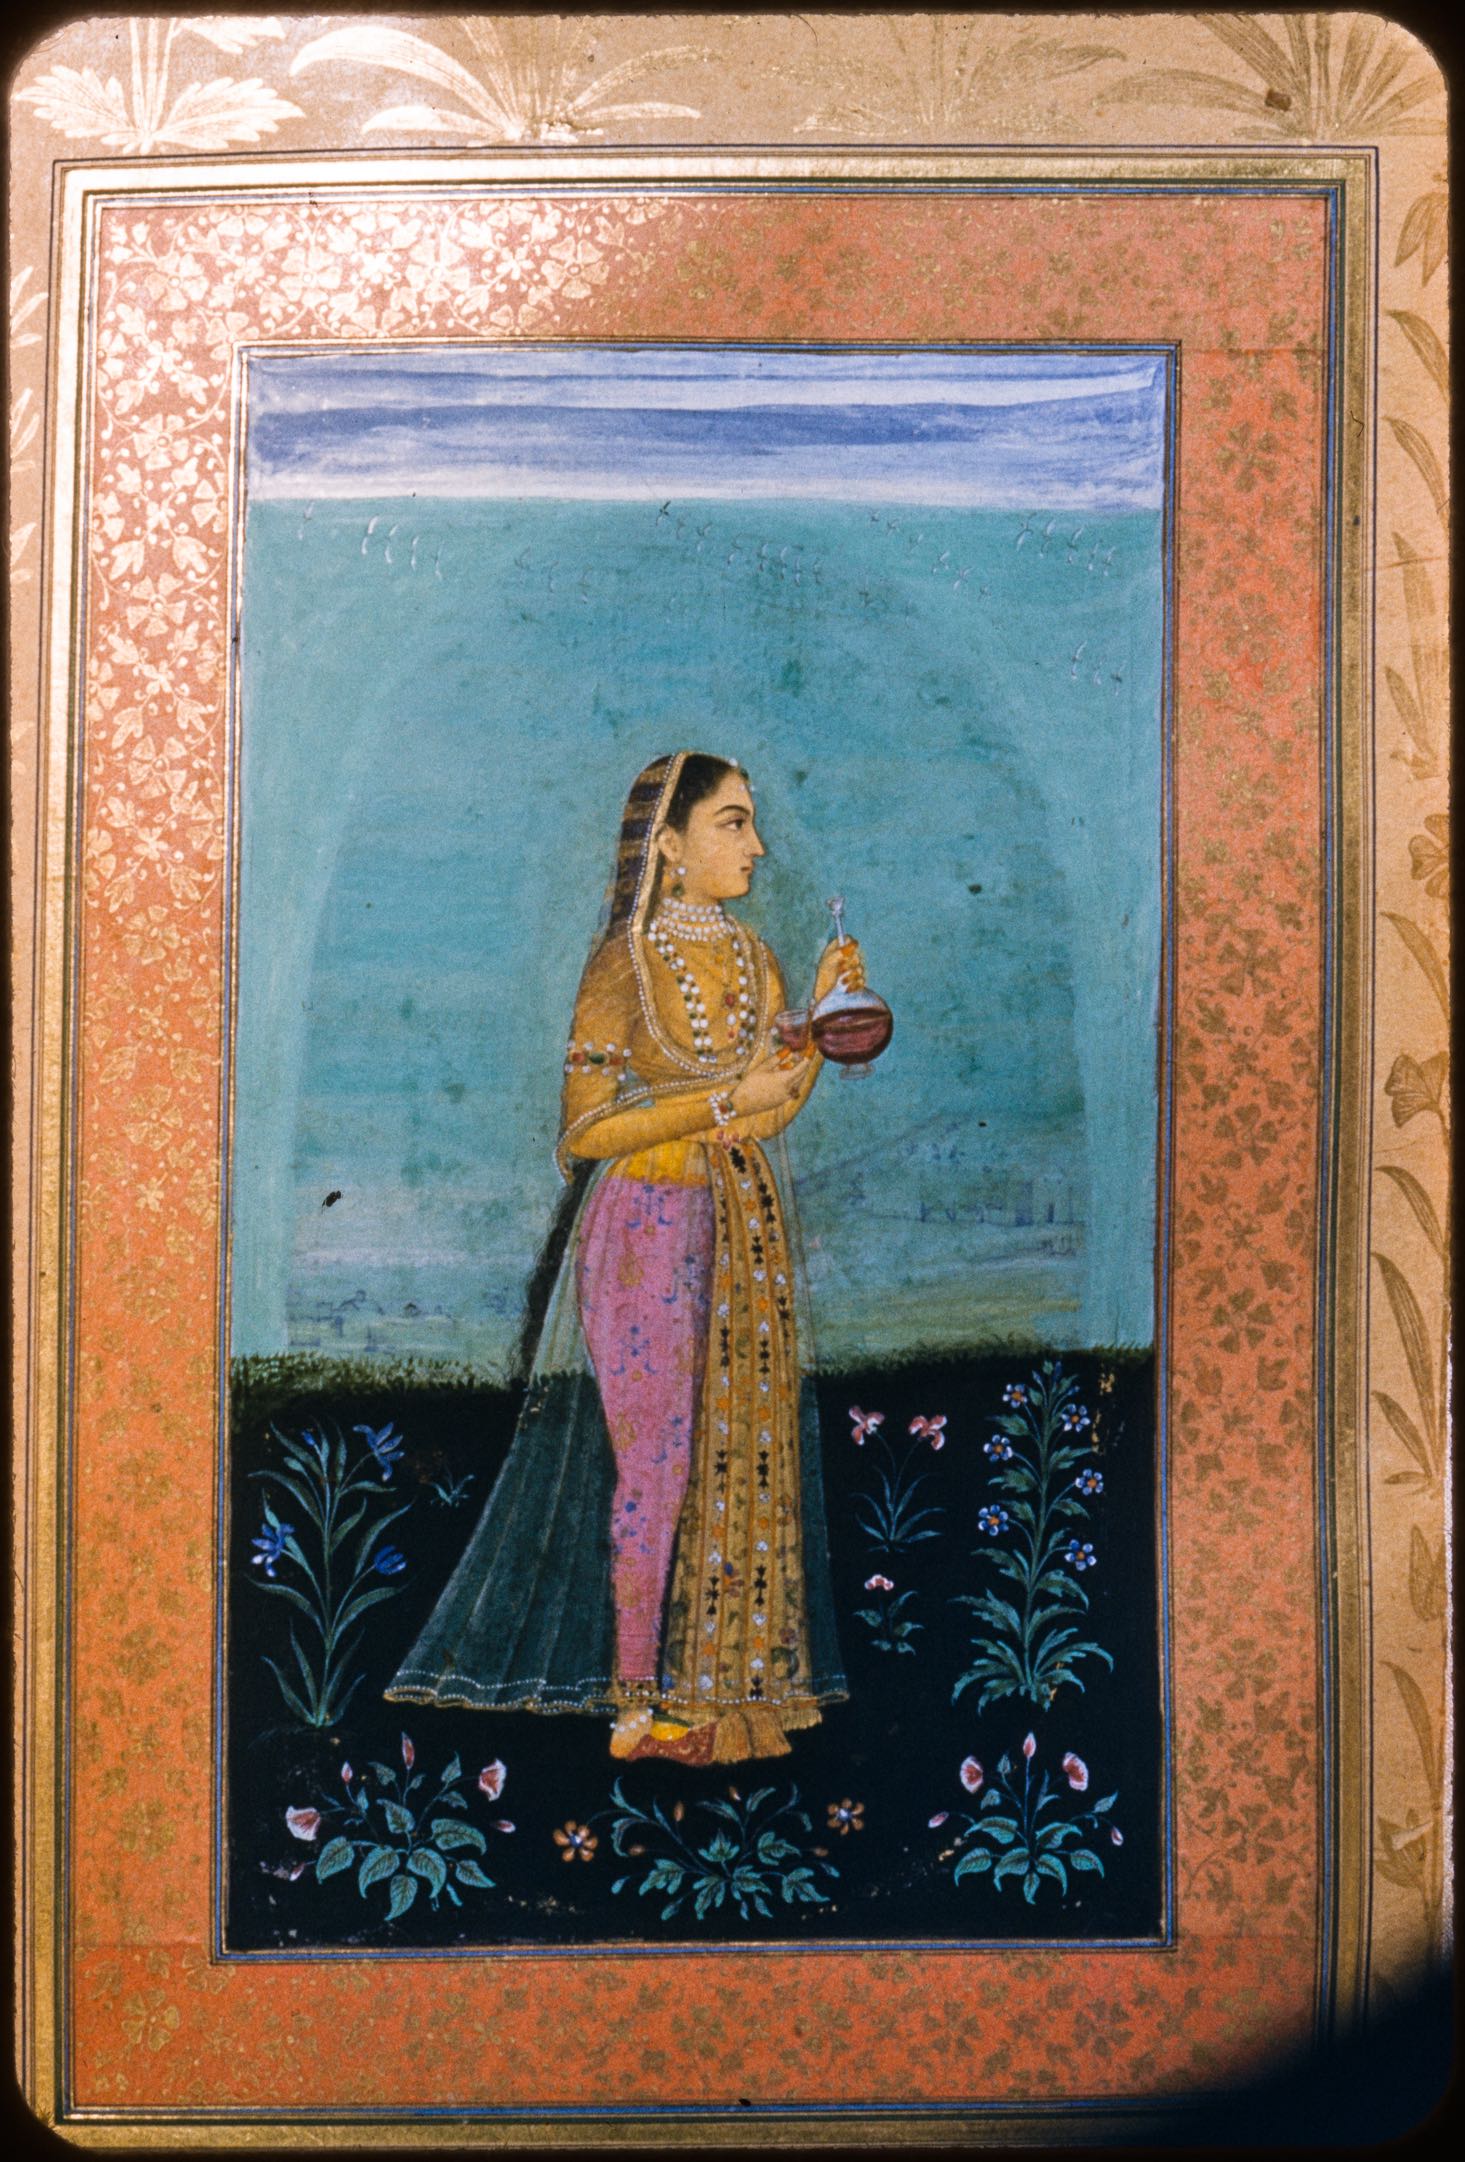 Girl holding a glass and cup, f. 30v from the Dara Shikoh Album (British Library Add. Or. 3129)